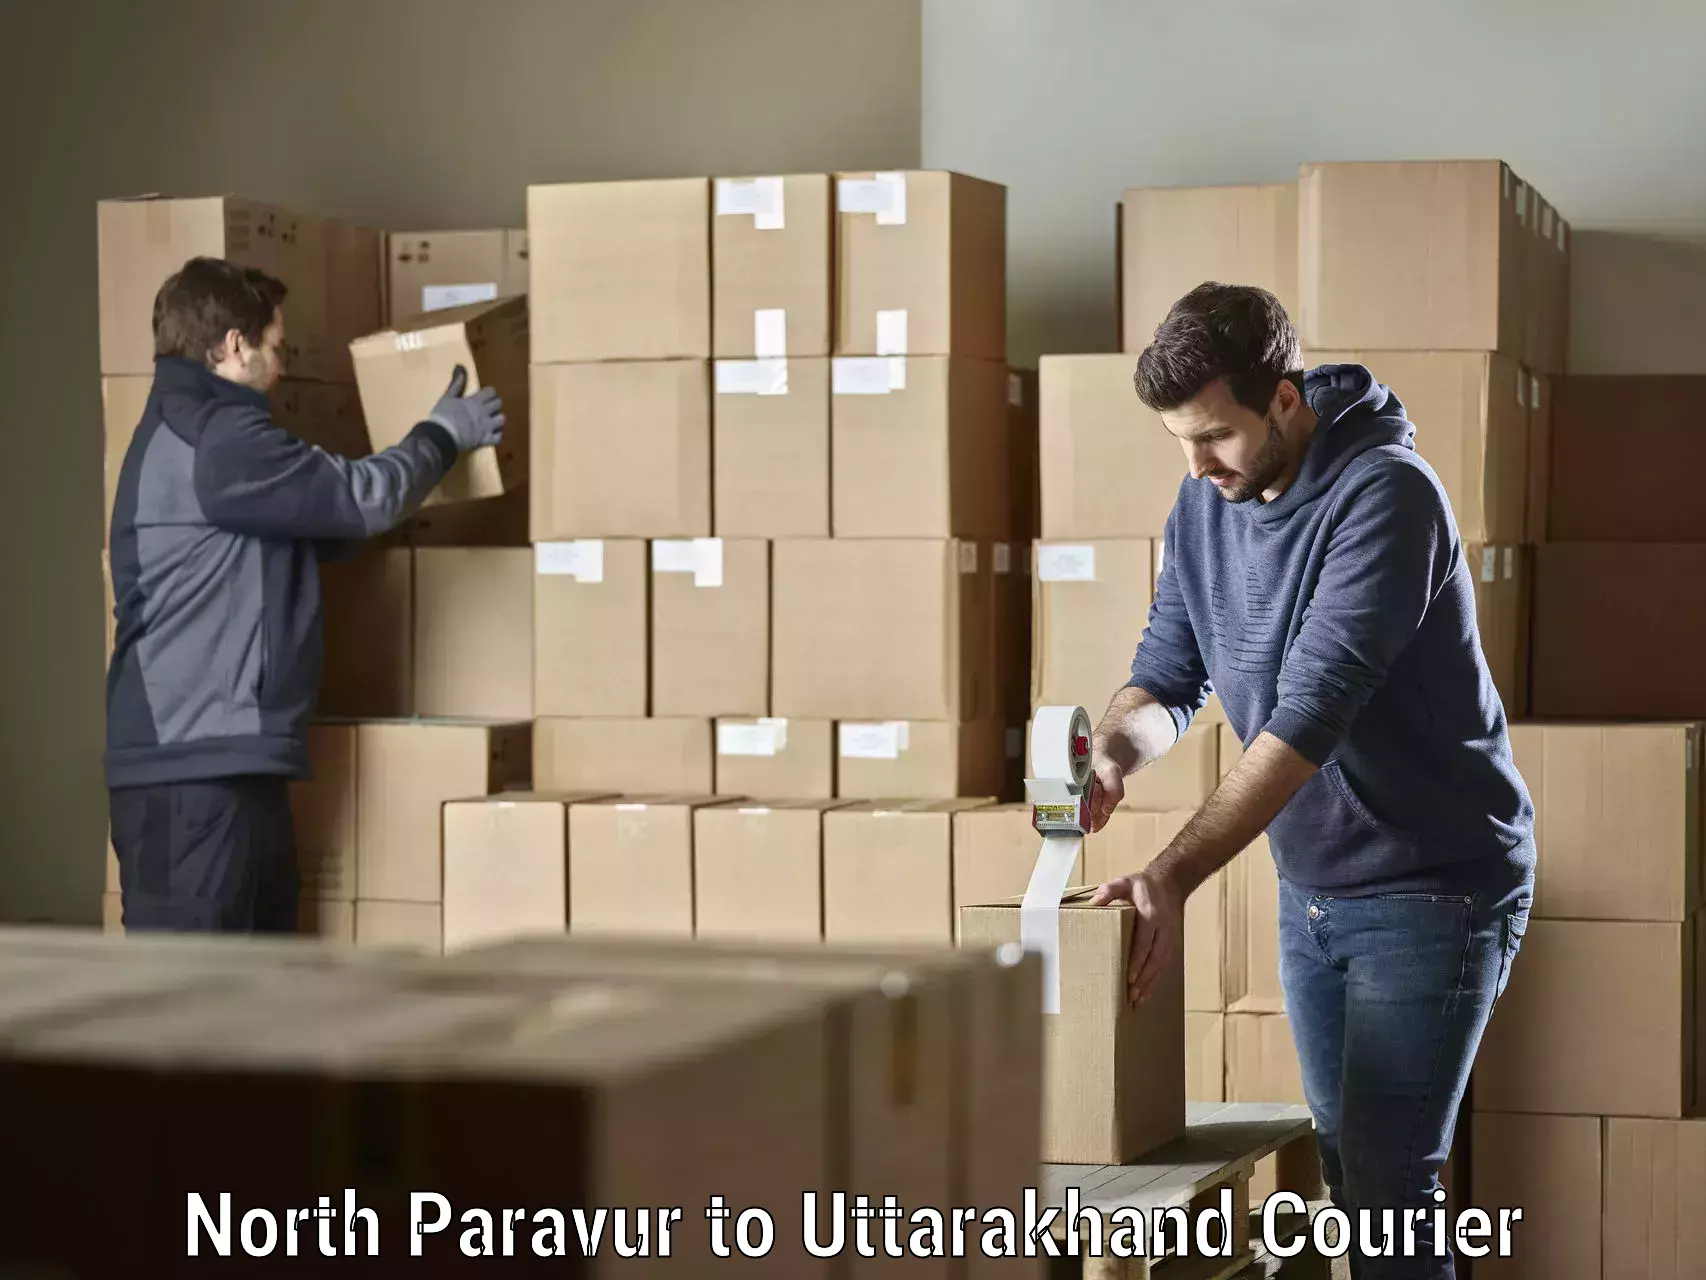 Small business couriers North Paravur to Srinagar Pauri Garhwal